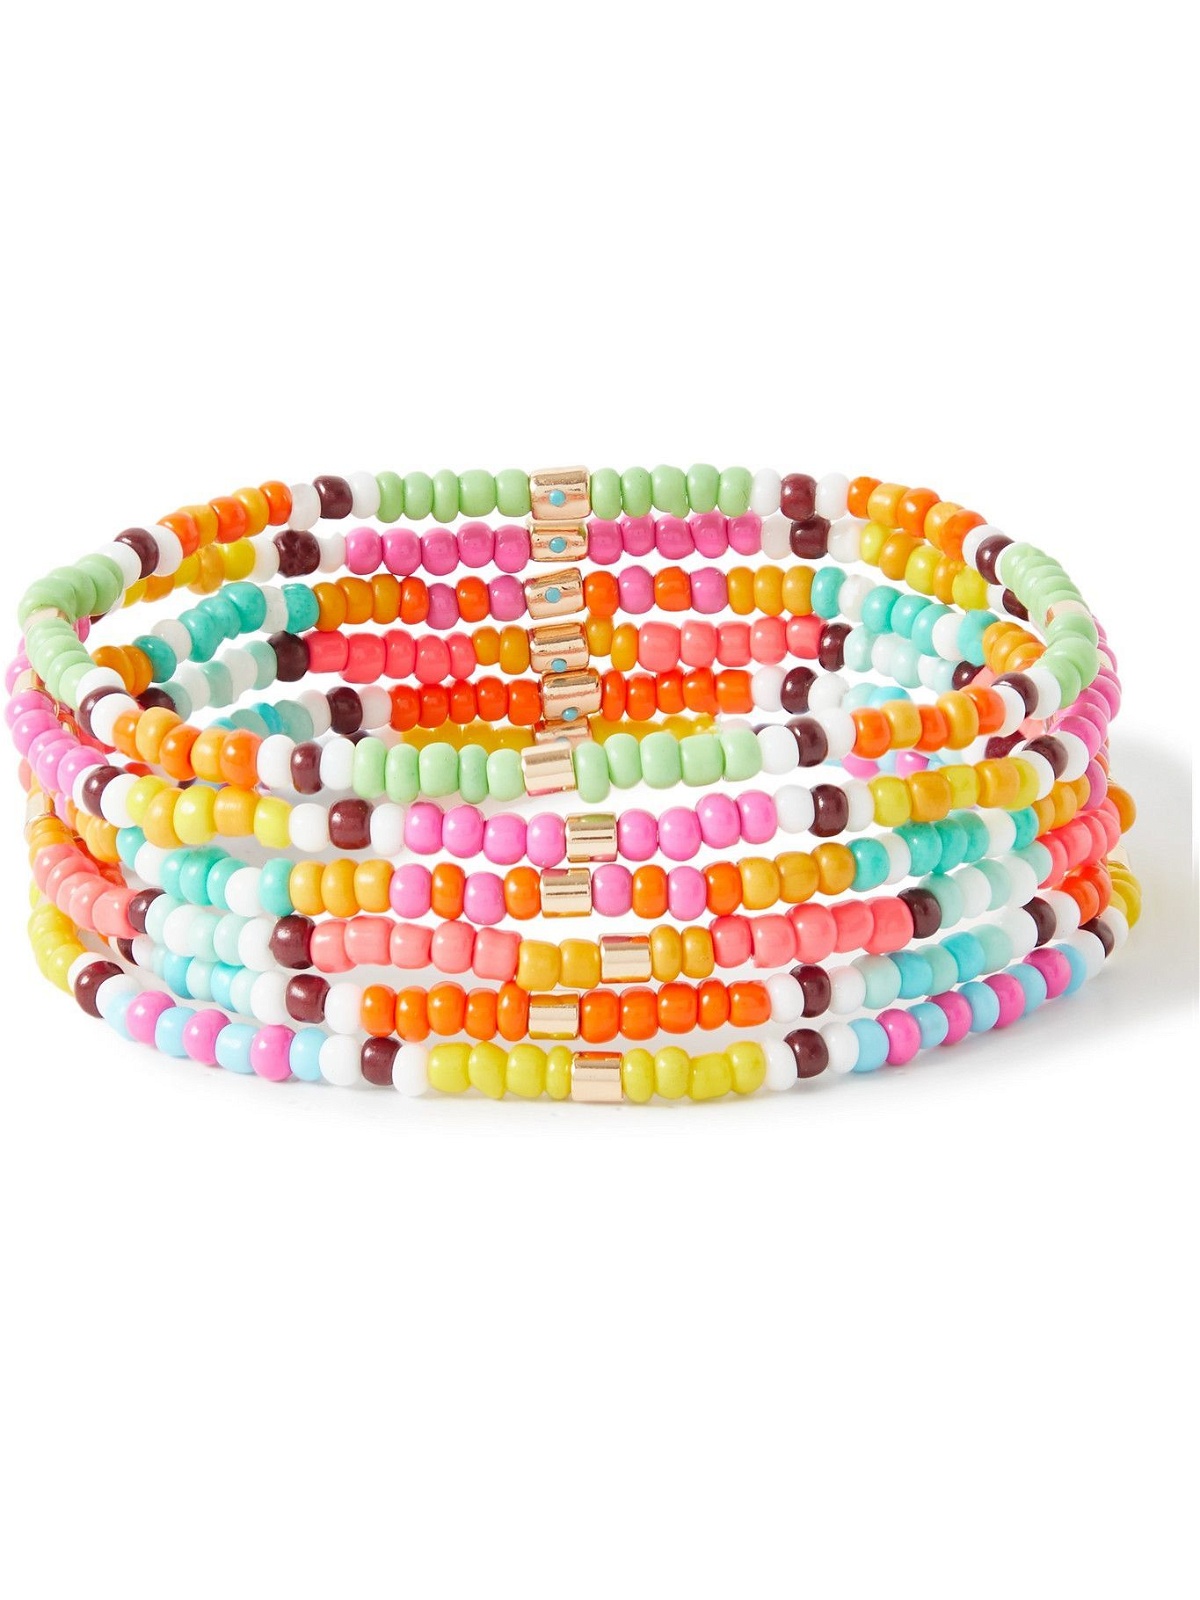 Roxanne Assoulin Colour Therapy Set of Eight Enamel and Gold-Tone Bracelets - Women - Pink Fashion Jewelry - One Size